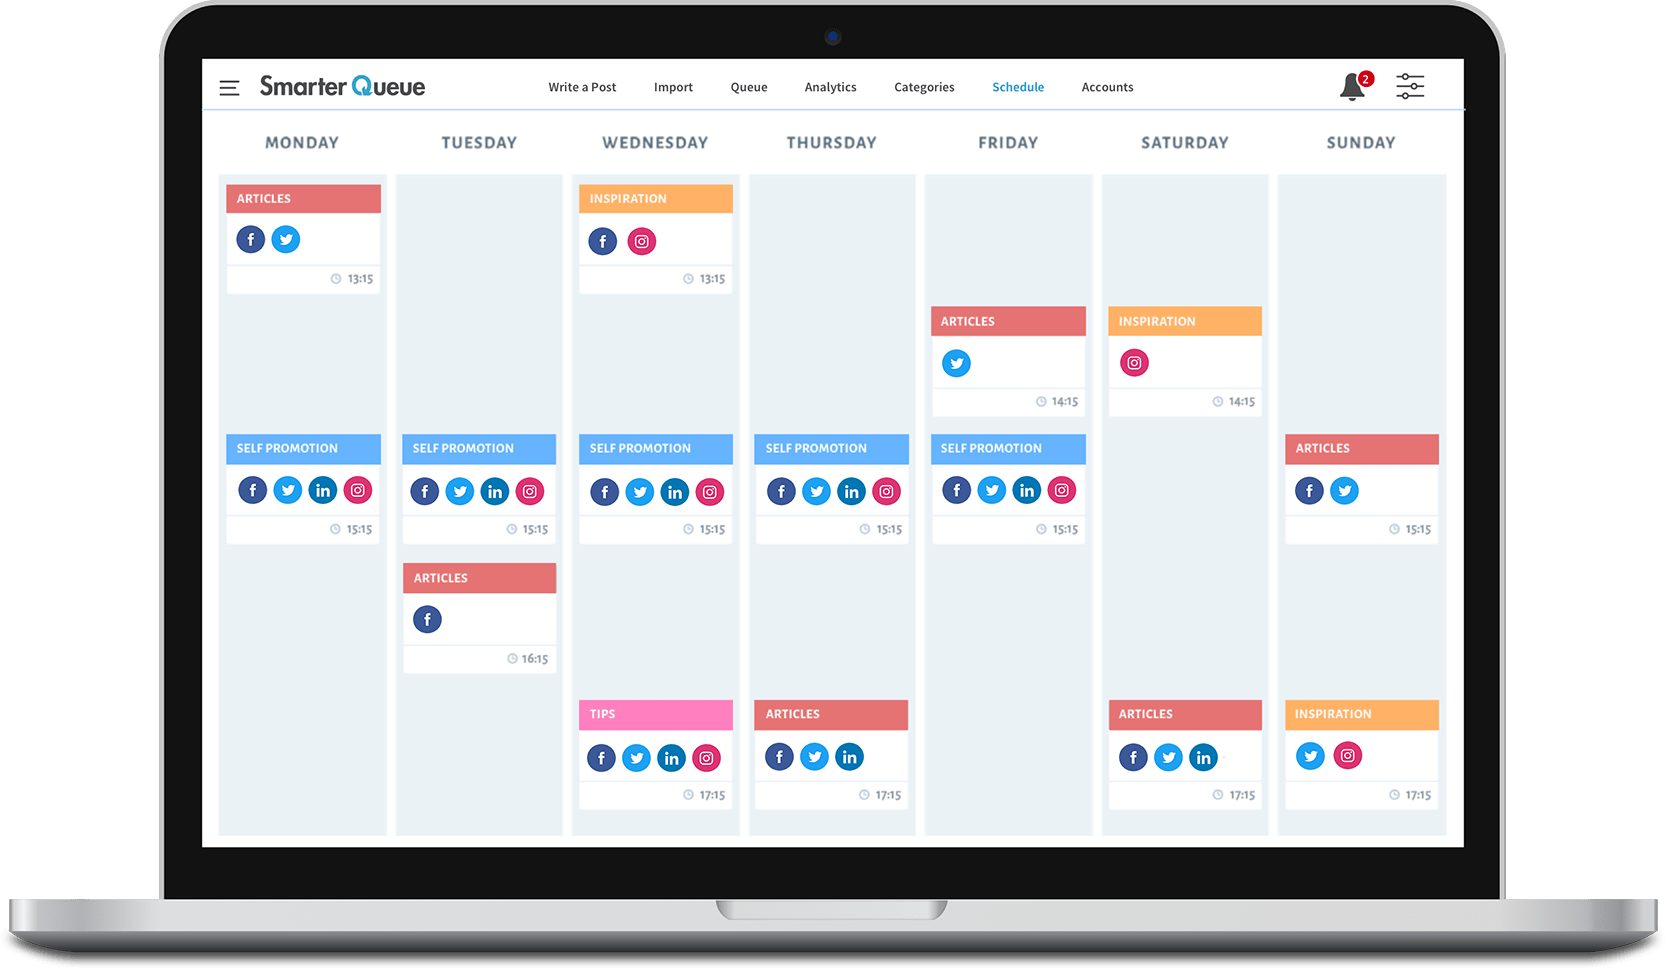 Image of SmarterQueue's visual calendar for scheduling